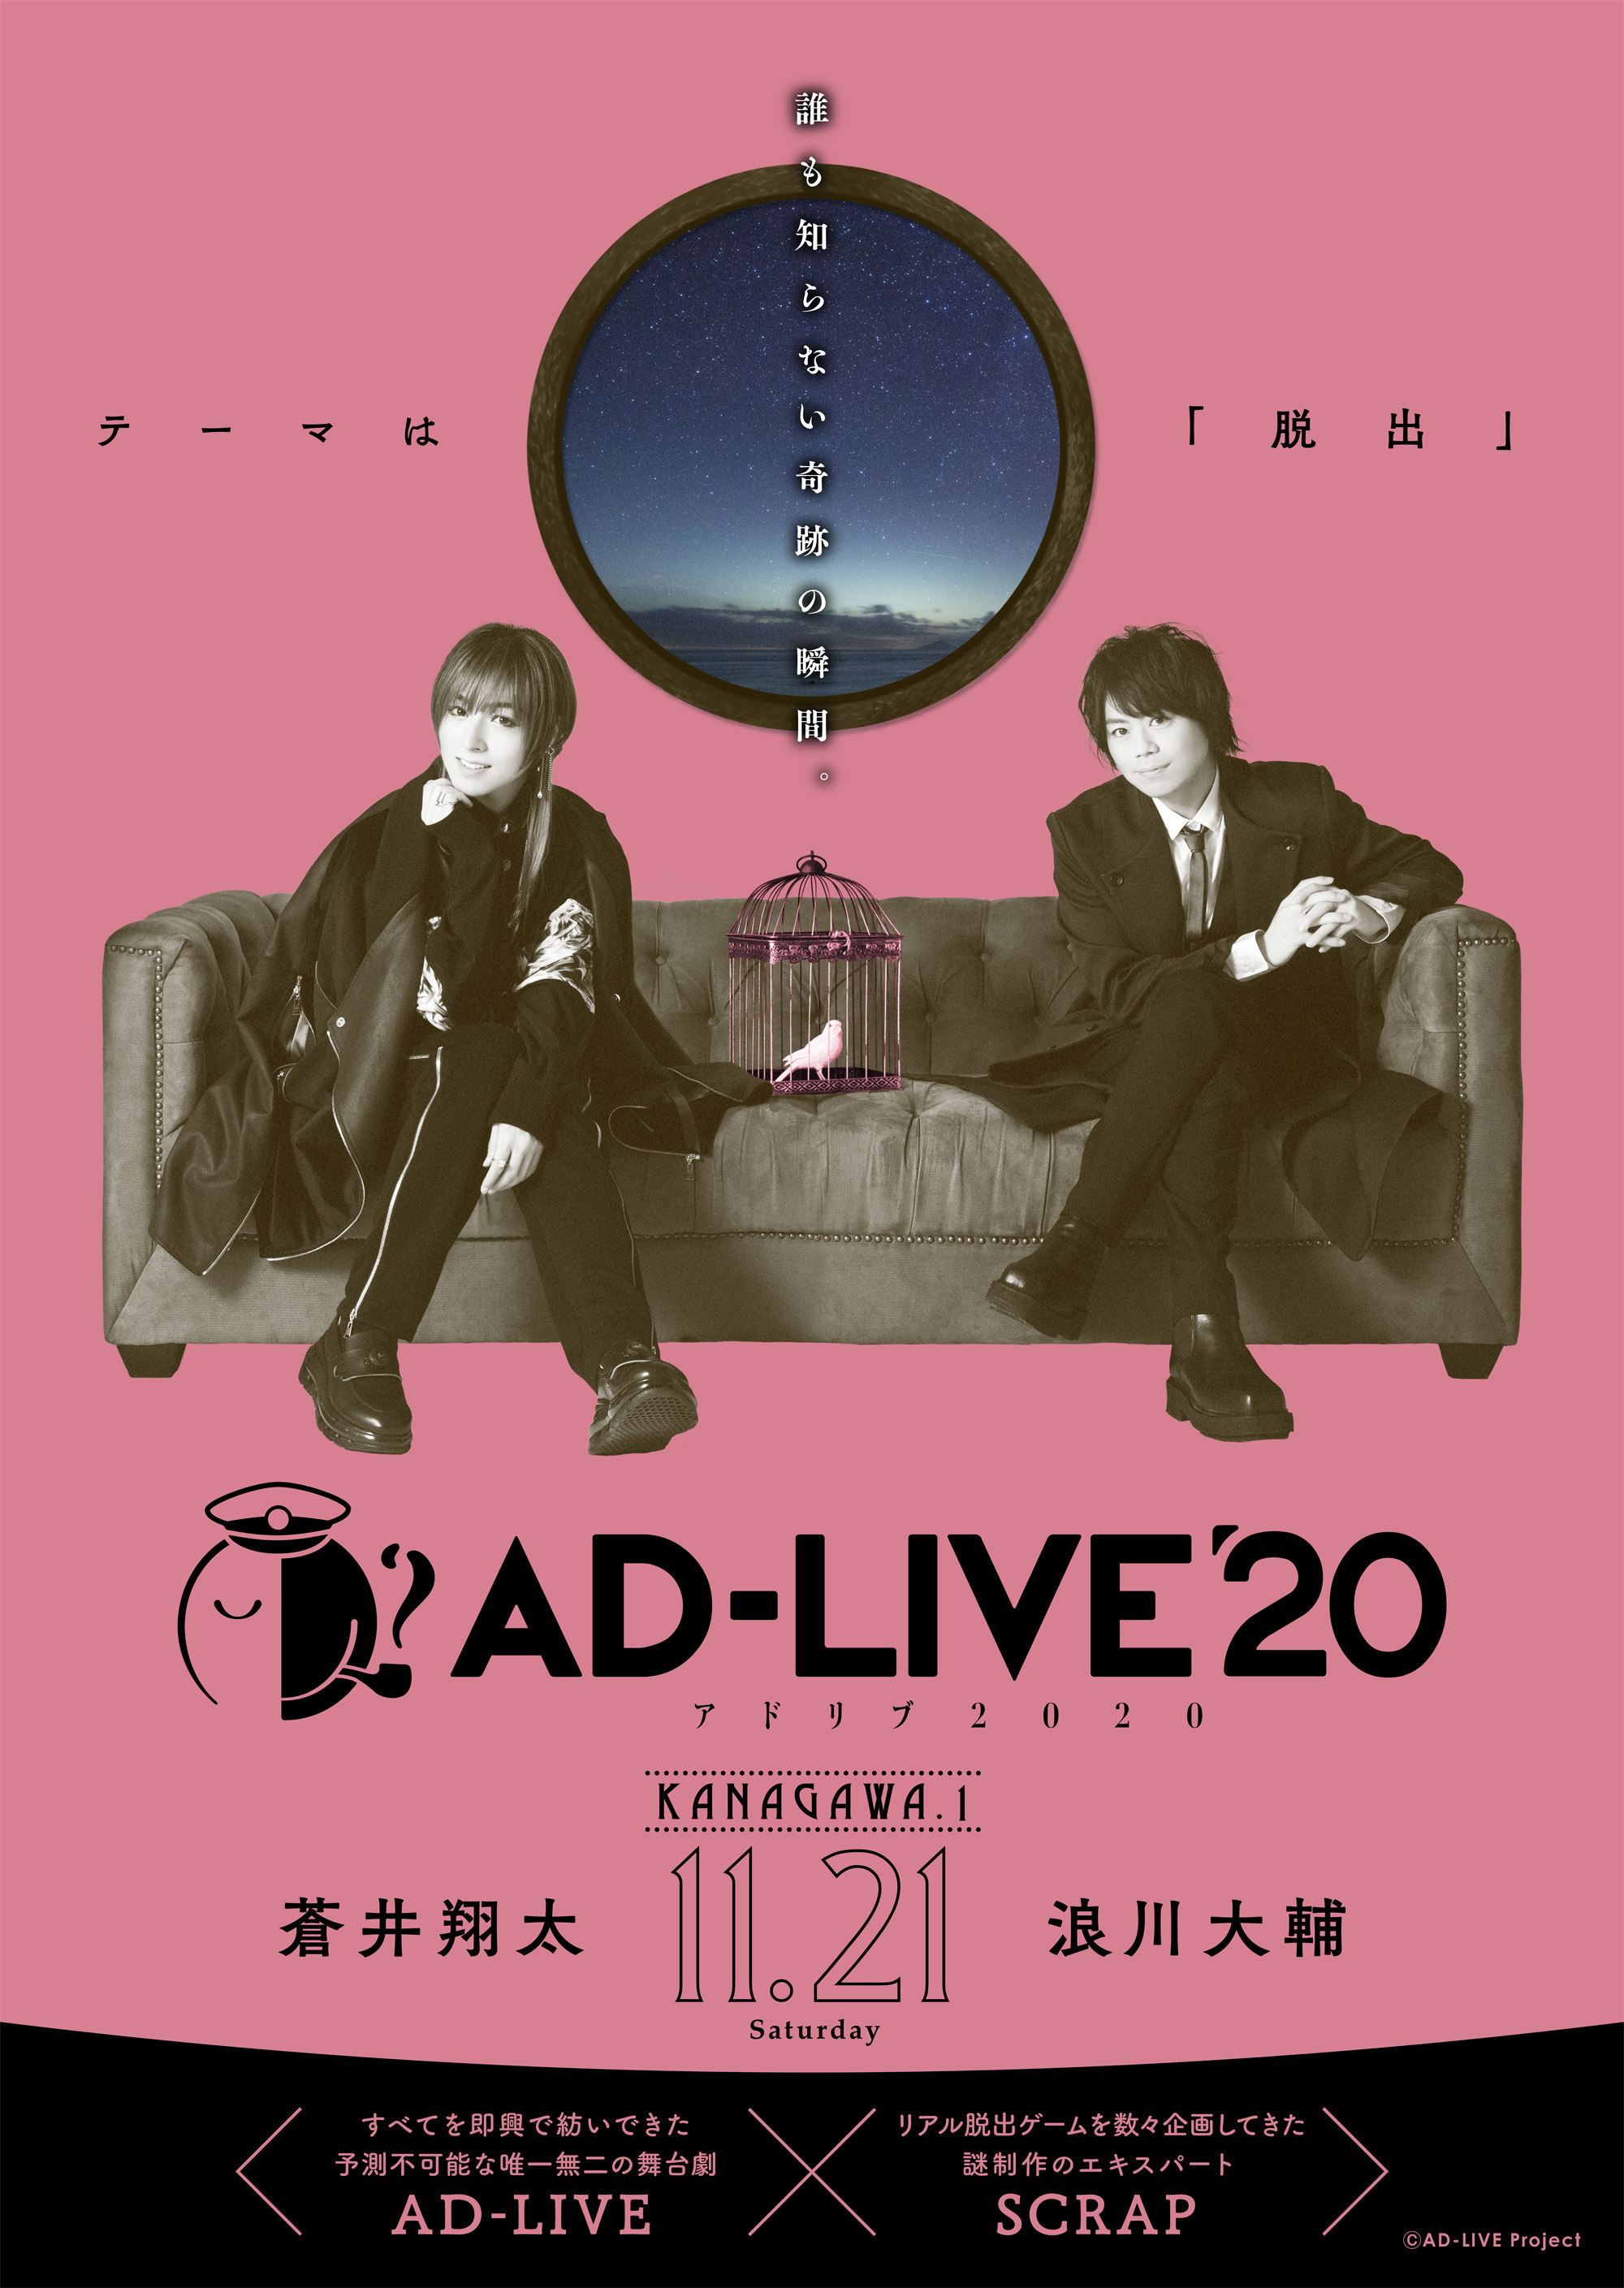 (C) AD-LIVE Project